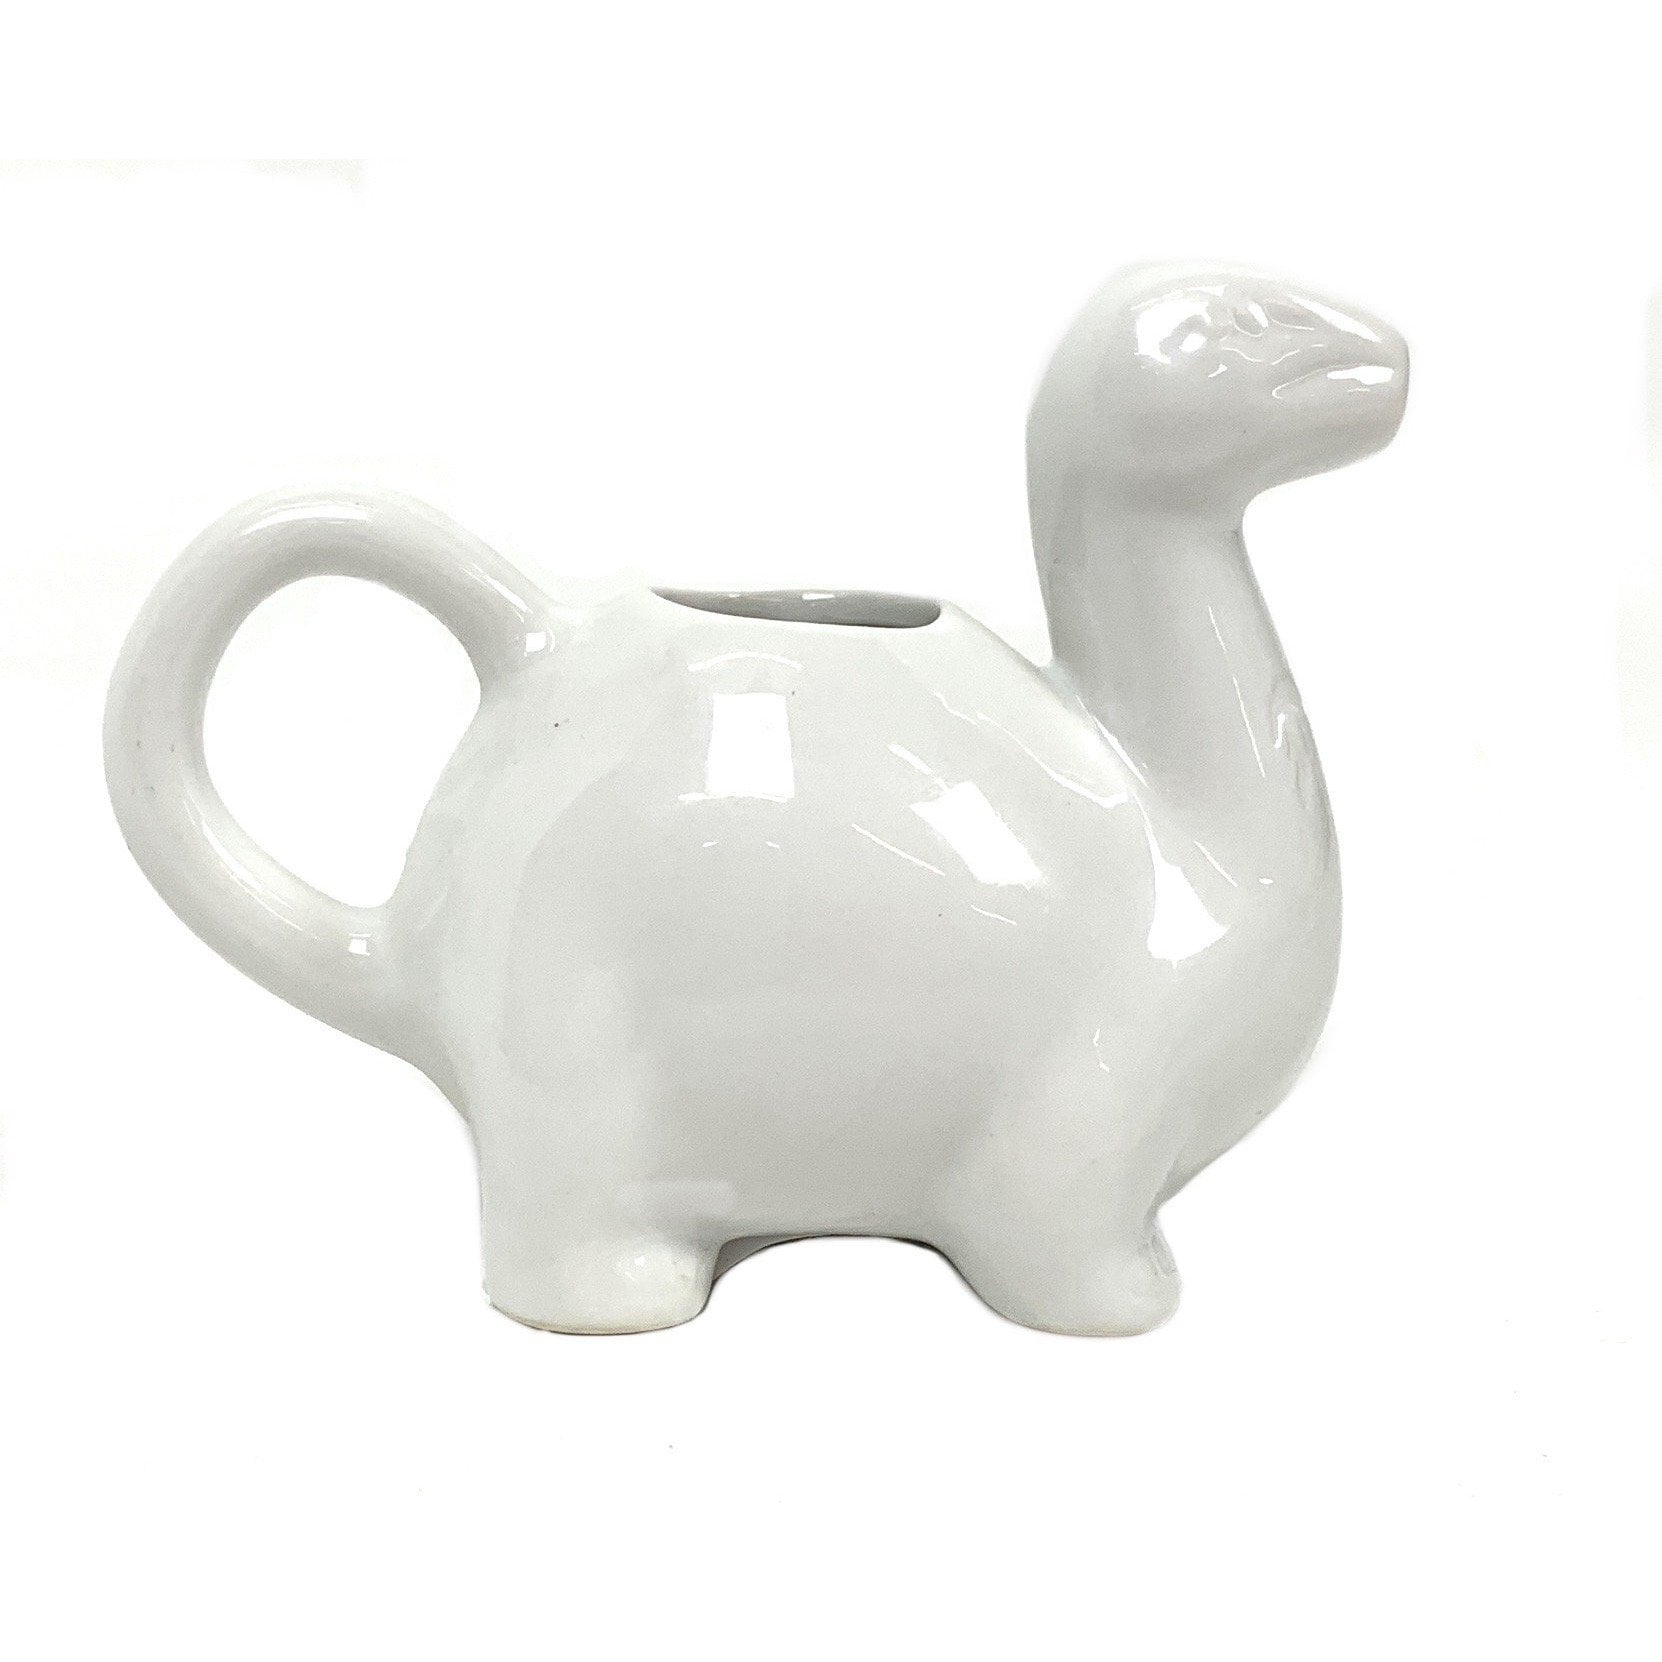 HIC Kitchen Creamer Pitcher with Handle, Fine White Porcelain, 8-Ounces,  Set of 2